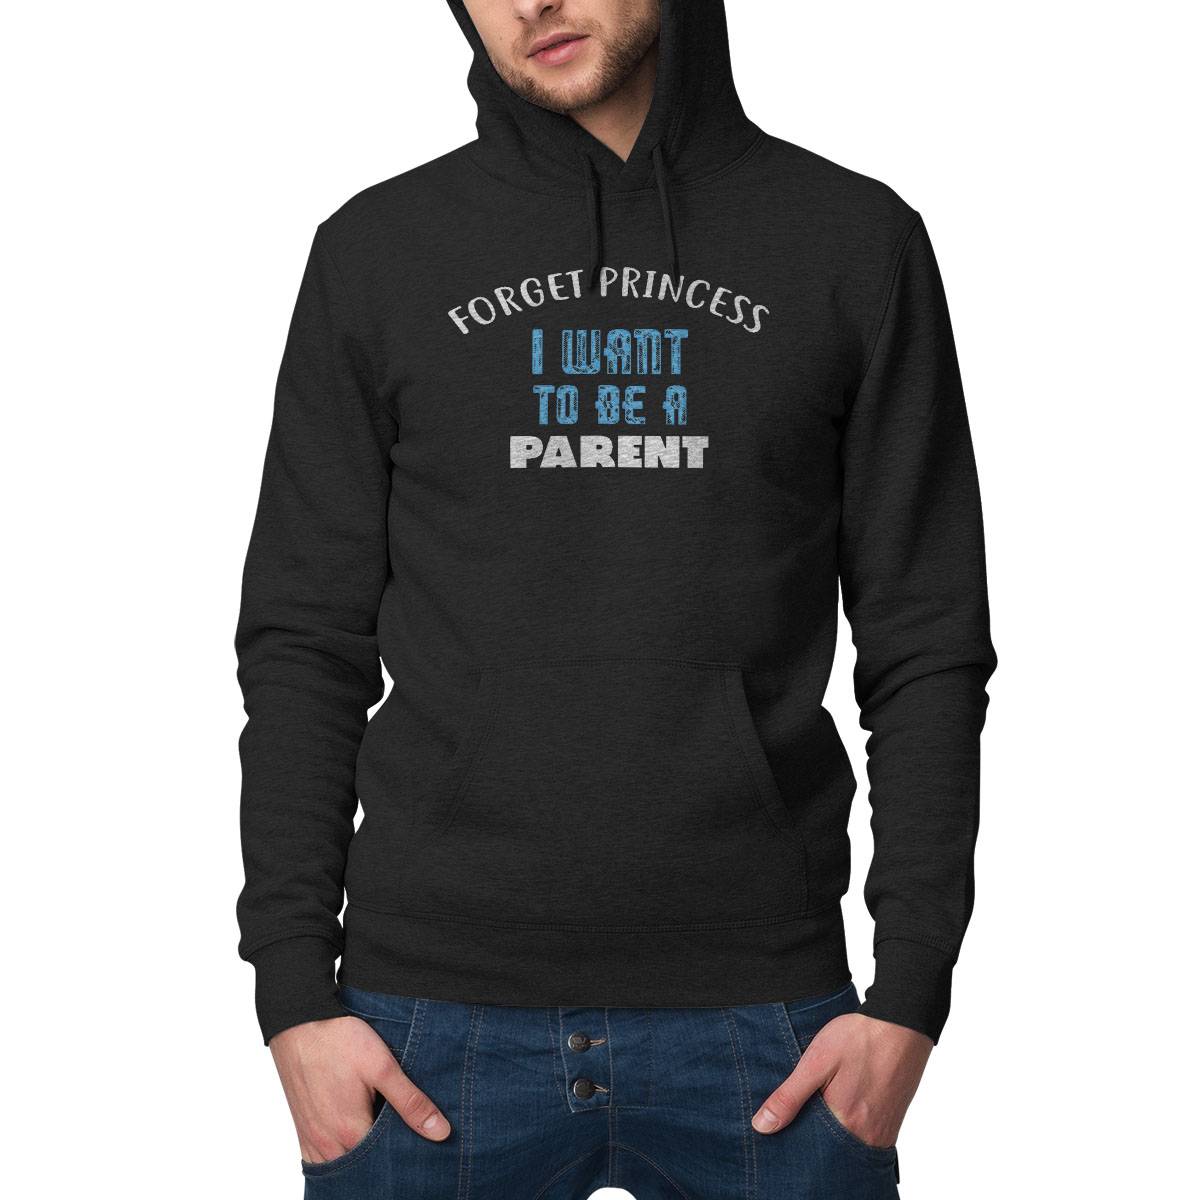 Forget Princess I Want To Be A Parent T-Shirt